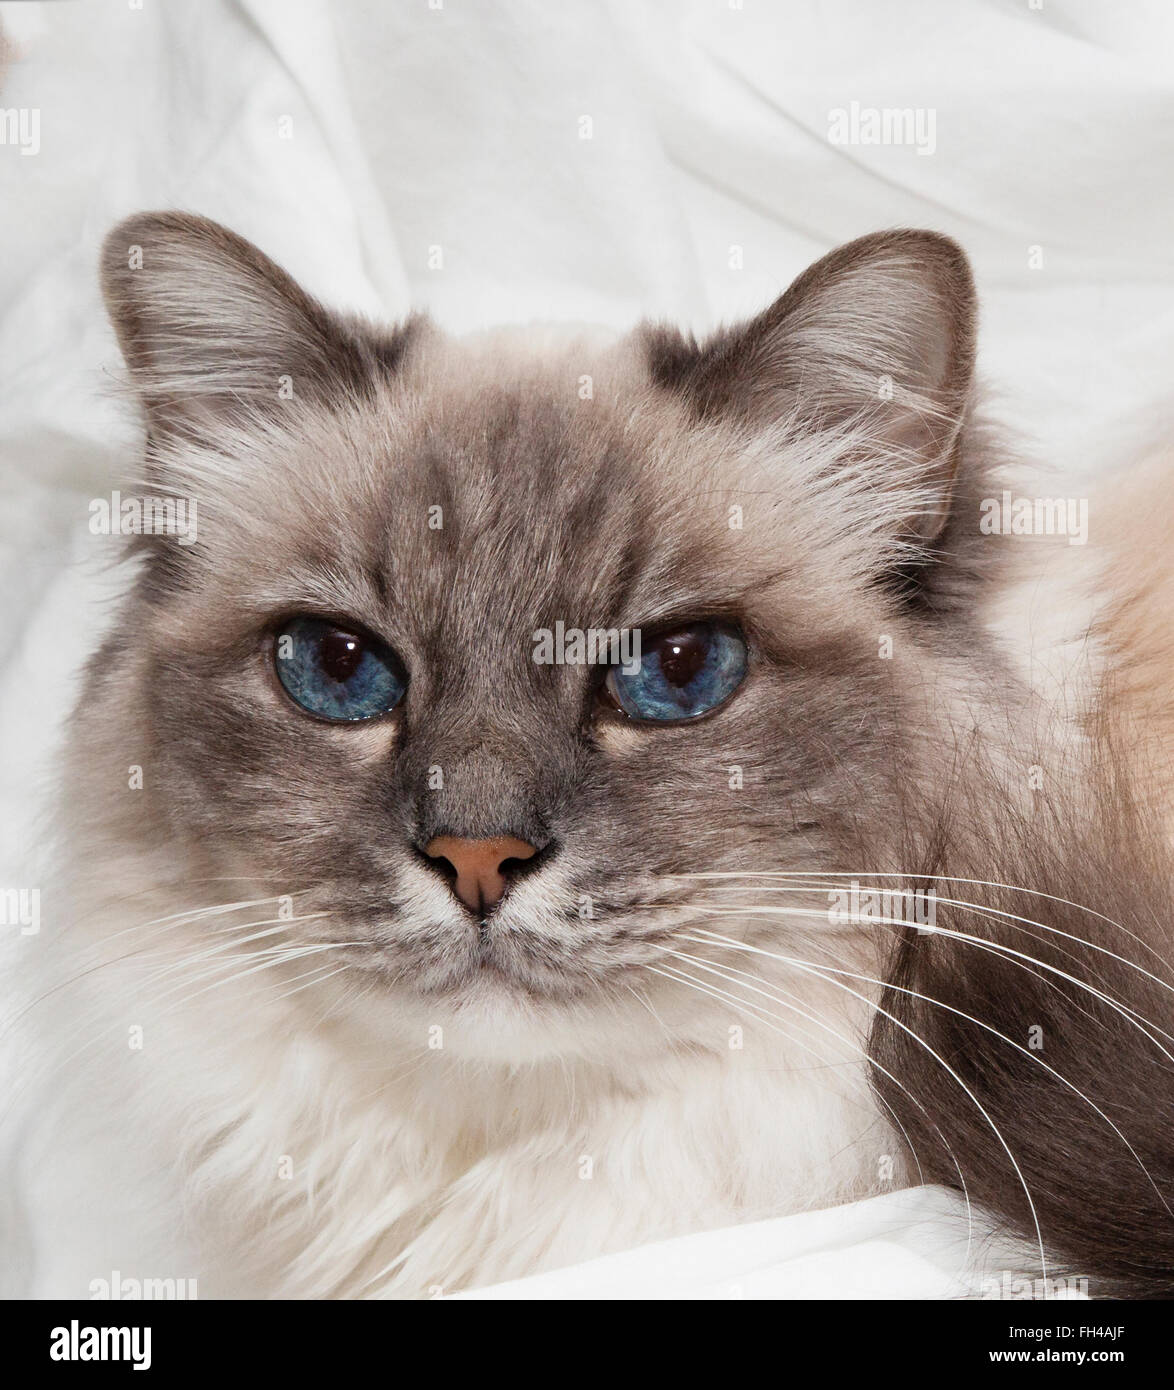 A close-up head shot of a male Birman cat. He is the 'Silver Tabby' coloration. Stock Photo